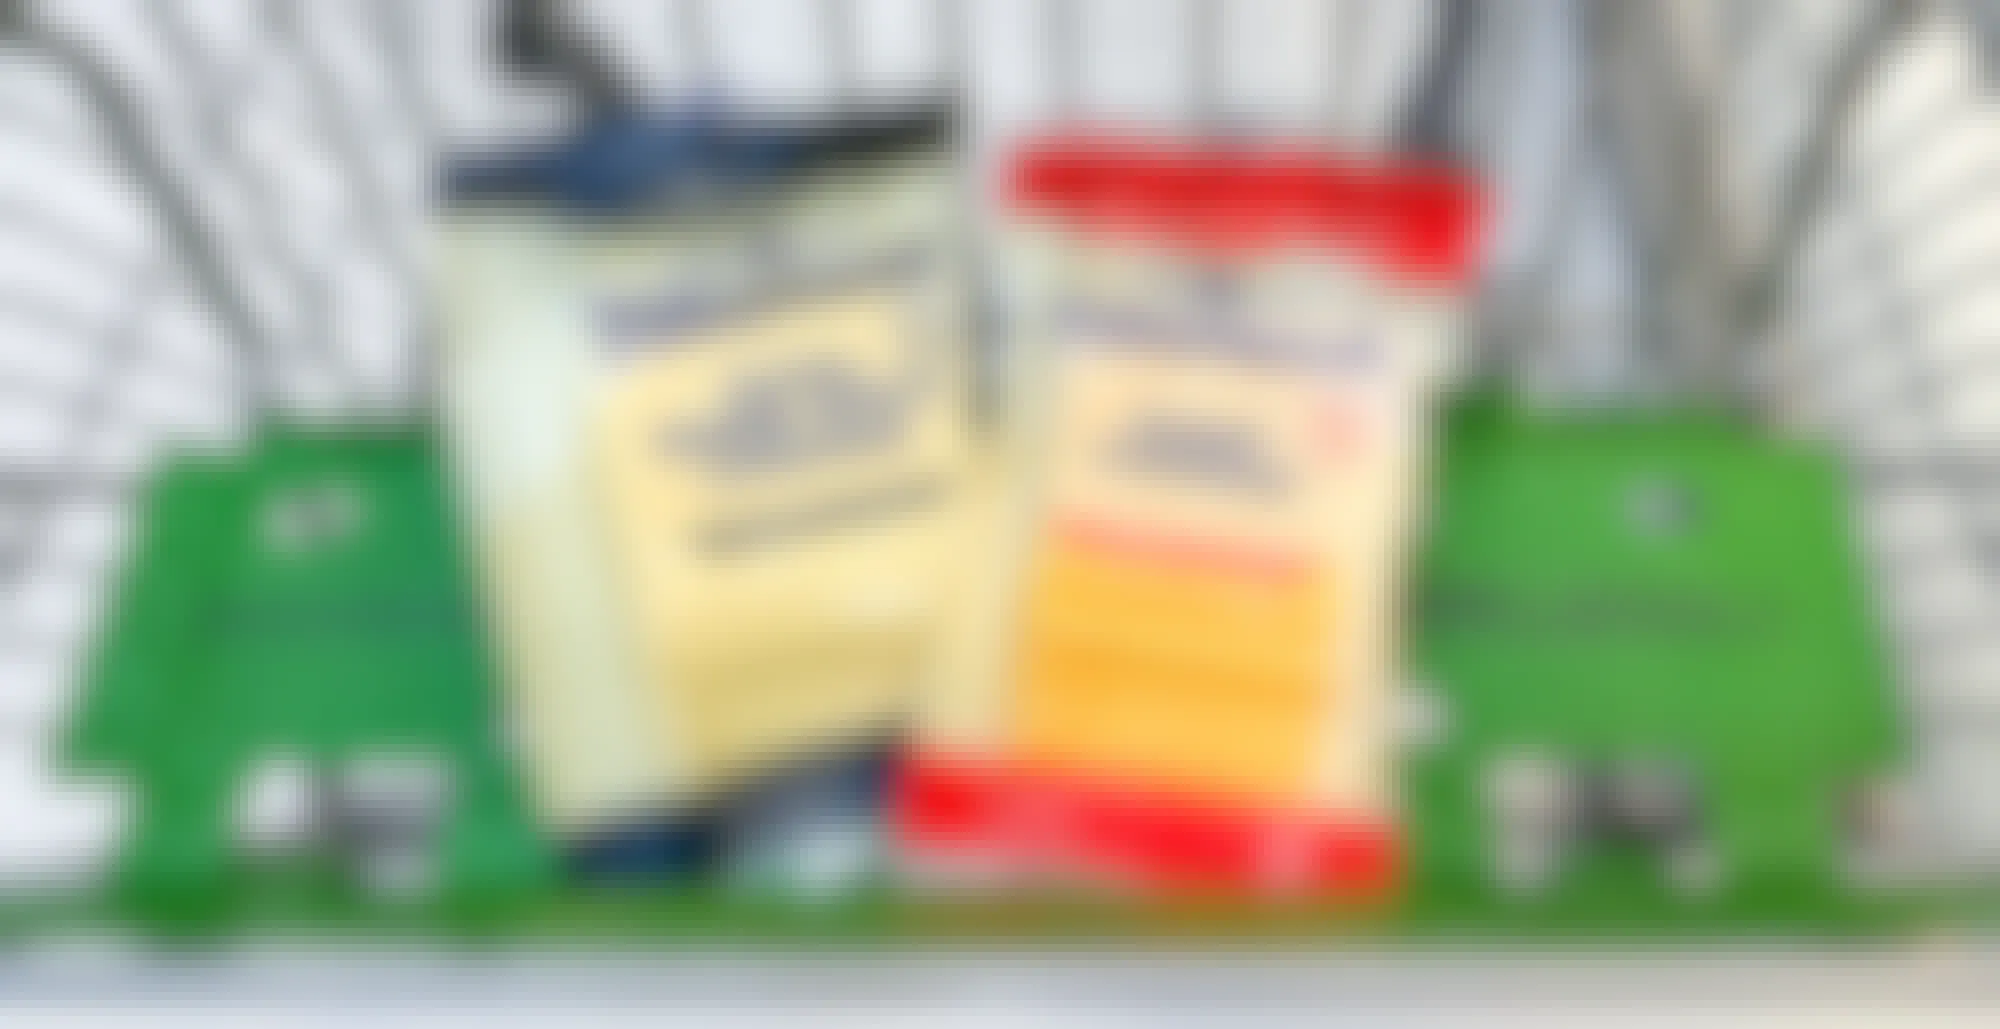 How to Get 2 Free Tillamook Cheese Packs at Publix